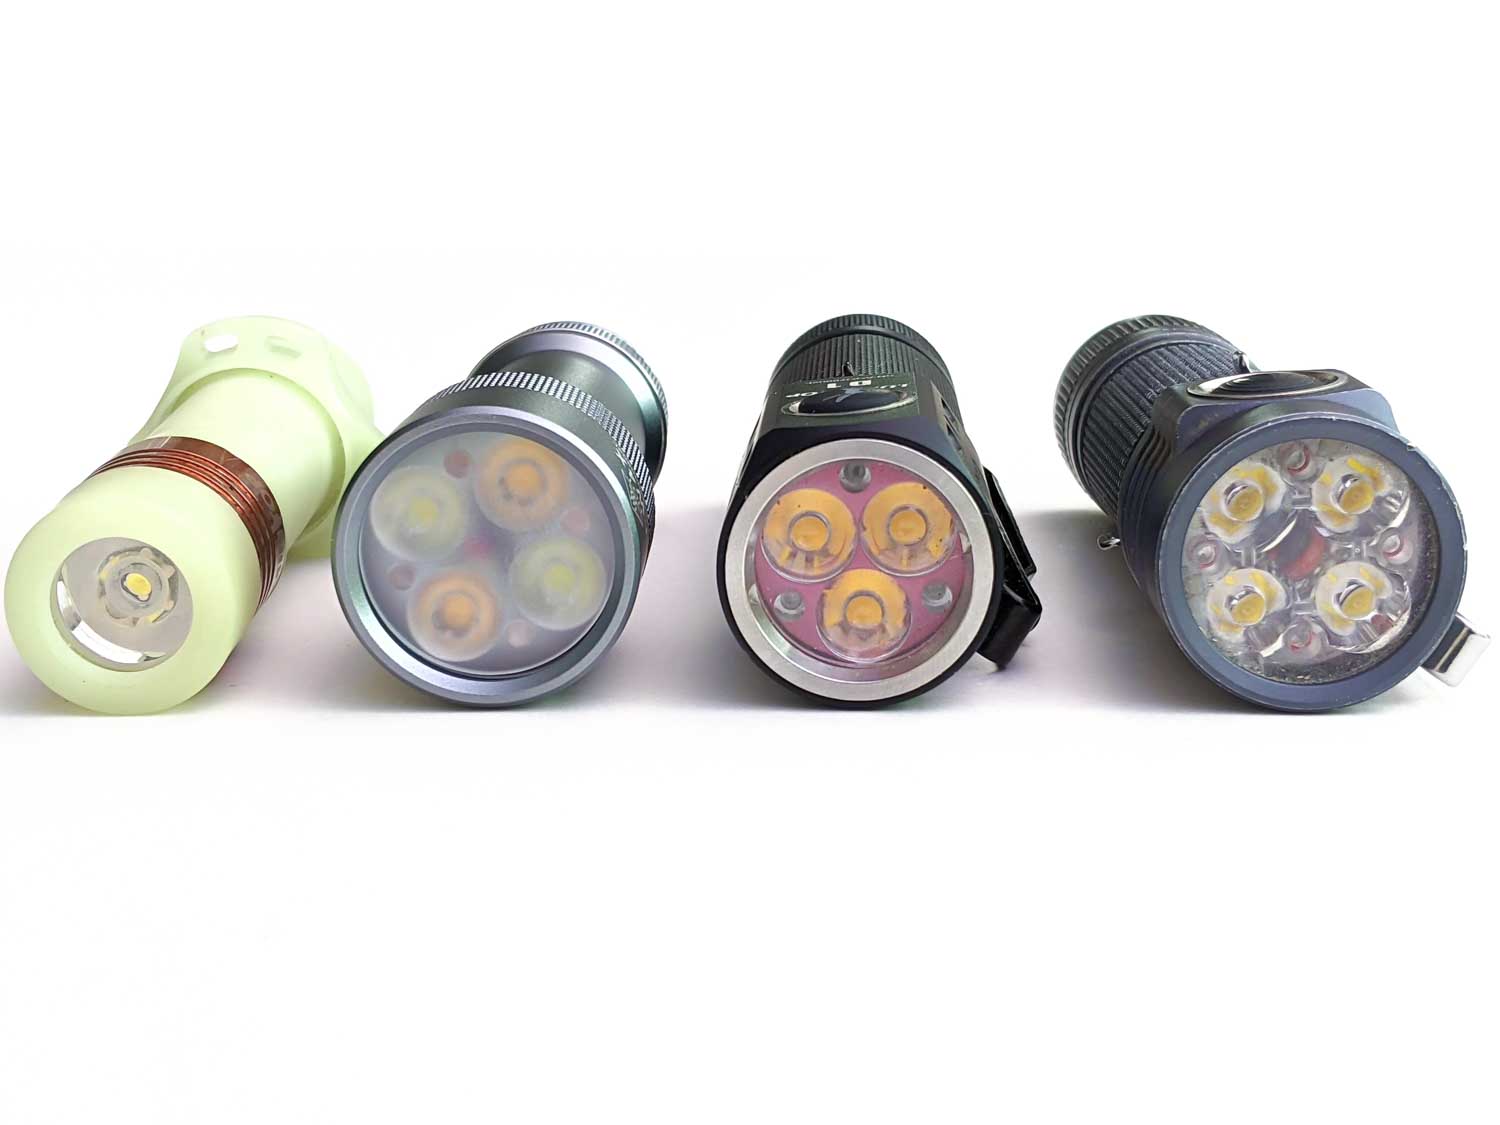 Lumintop FW4X compared to other flashlights